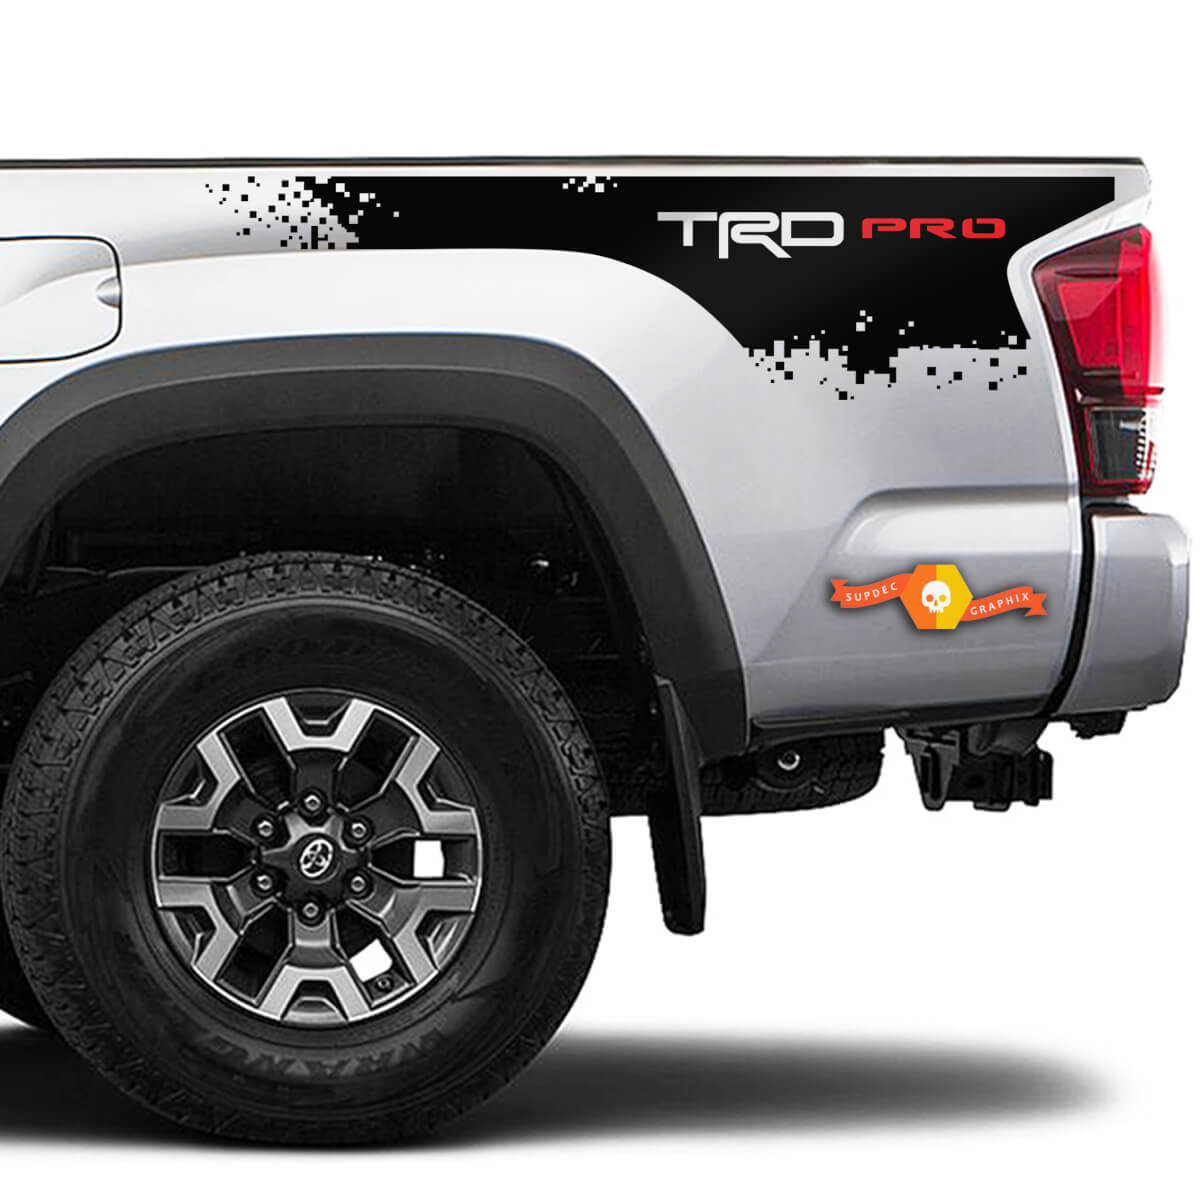 2 Toyota Tacoma 2016-2022+ TRD Pro Destroyed Bed Side Bed Stripes Vinyl Stickers Decal for Toyota Tacoma